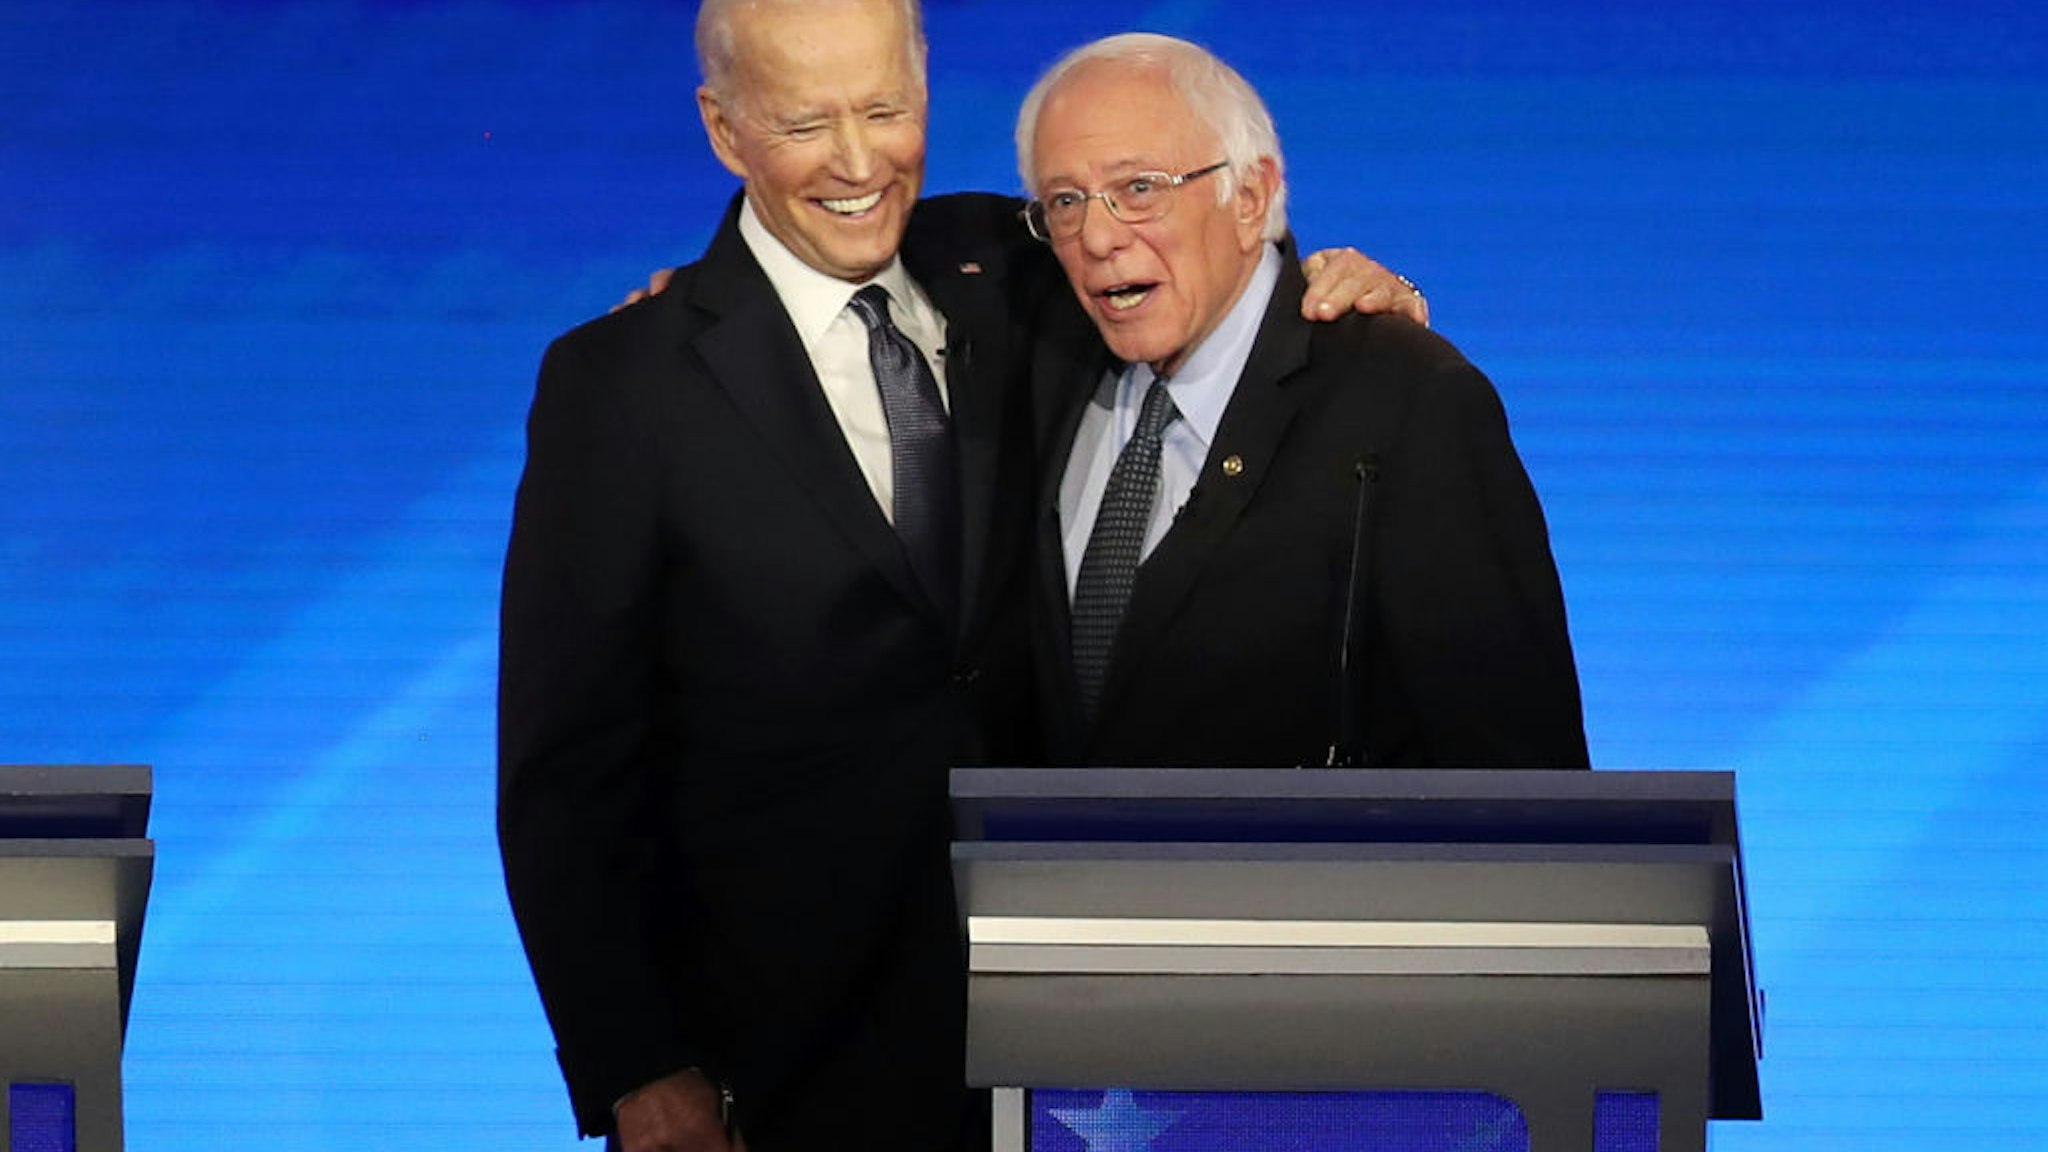 MANCHESTER, NEW HAMPSHIRE - FEBRUARY 07: (L-R) Democratic presidential candidates former Vice President Joe Biden and Sen. Bernie Sanders (I-VT) share a moment during the Democratic presidential primary debate in the Sullivan Arena at St. Anselm College on February 07, 2020 in Manchester, New Hampshire. Seven candidates qualified for the second Democratic presidential primary debate of 2020 which comes just days before the New Hampshire primary on February 11. (Photo by Joe Raedle/Getty Images)